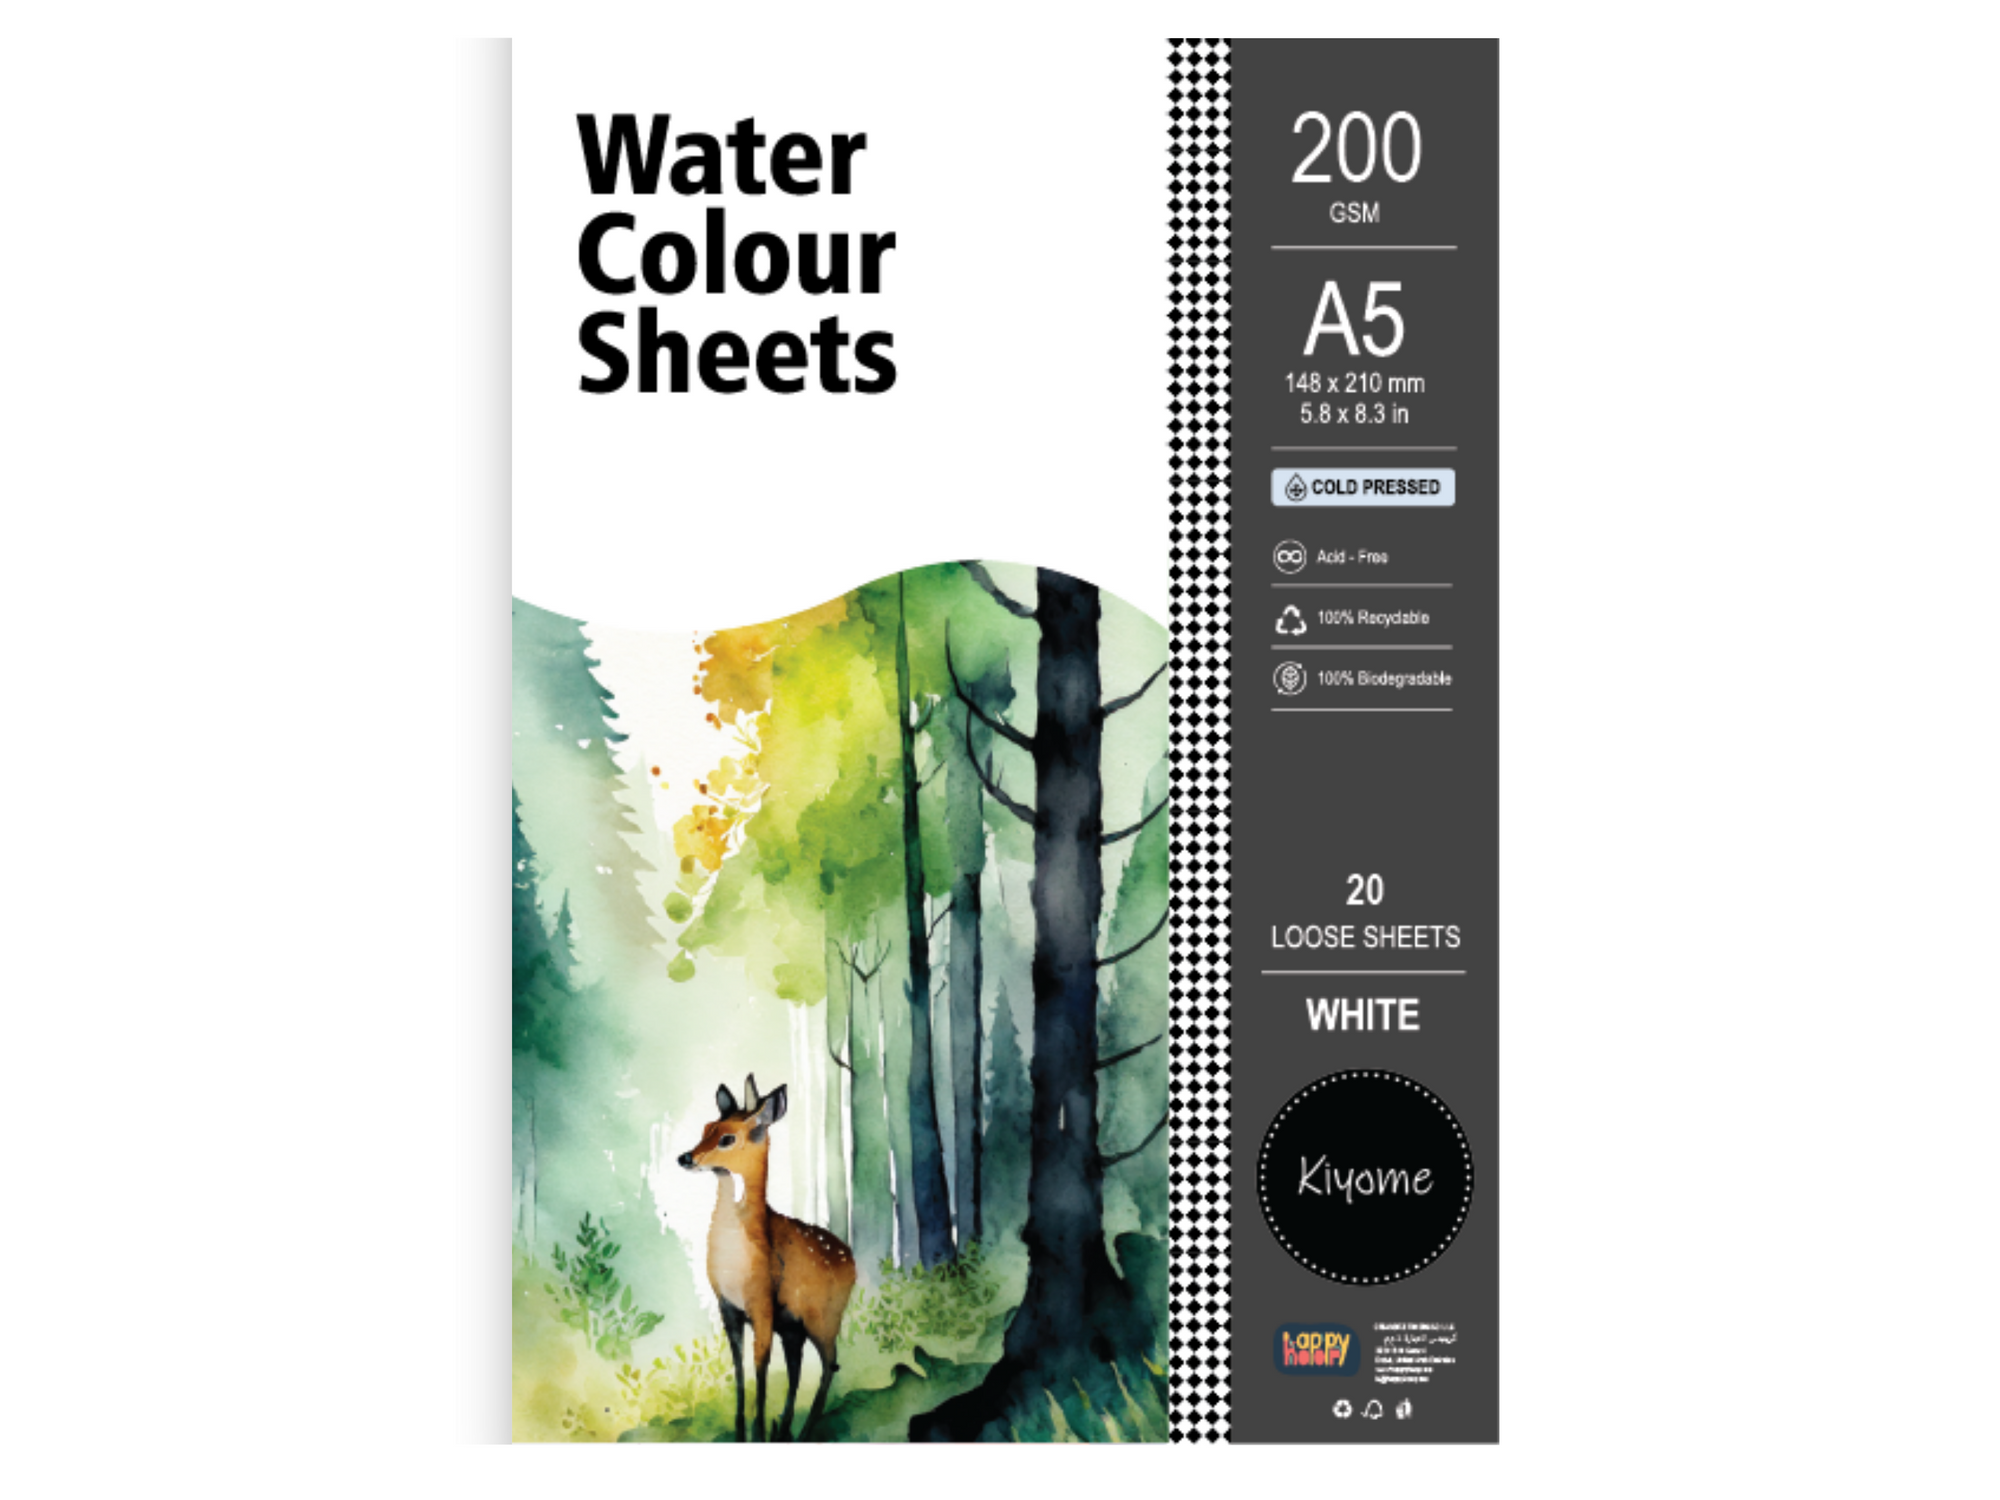 Kiyome Watercolour Sheets | 200 GSM | Cold Pressed | A4 | 10 Sheets